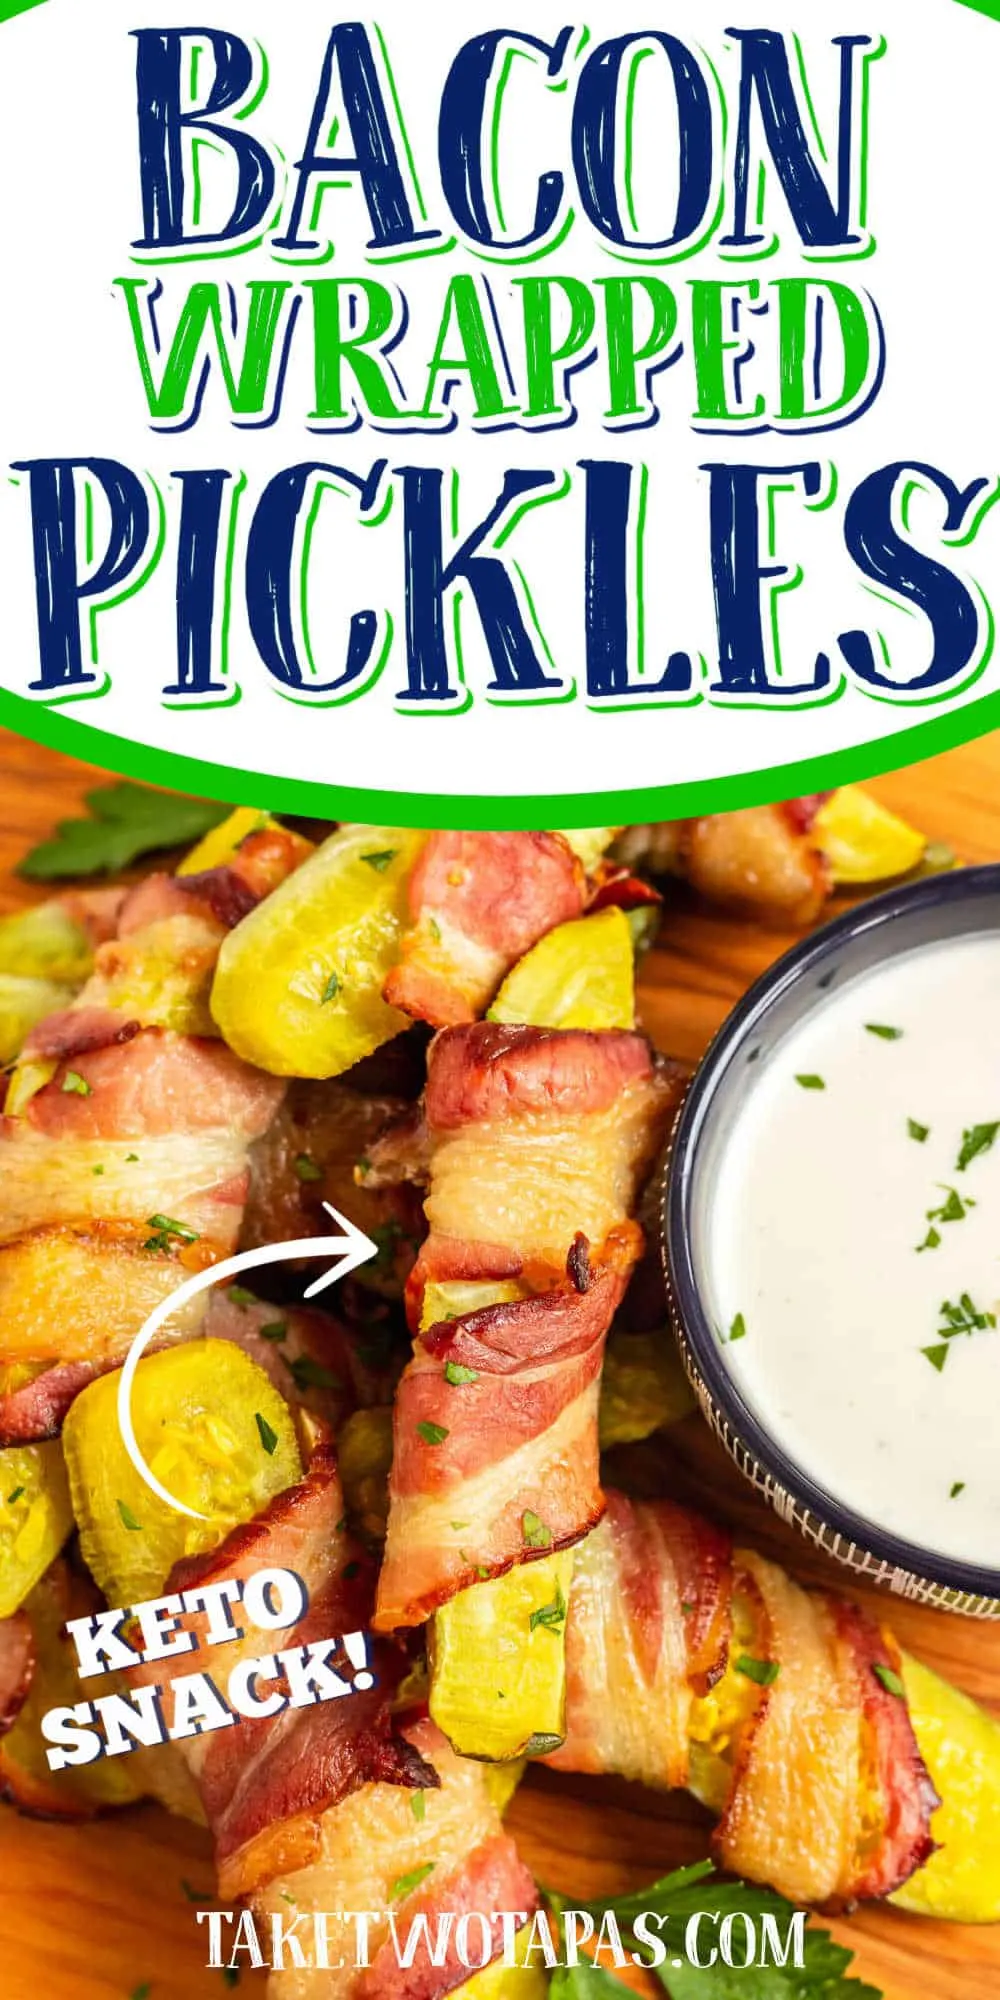 pickles with text "bacon wrapped pickles"